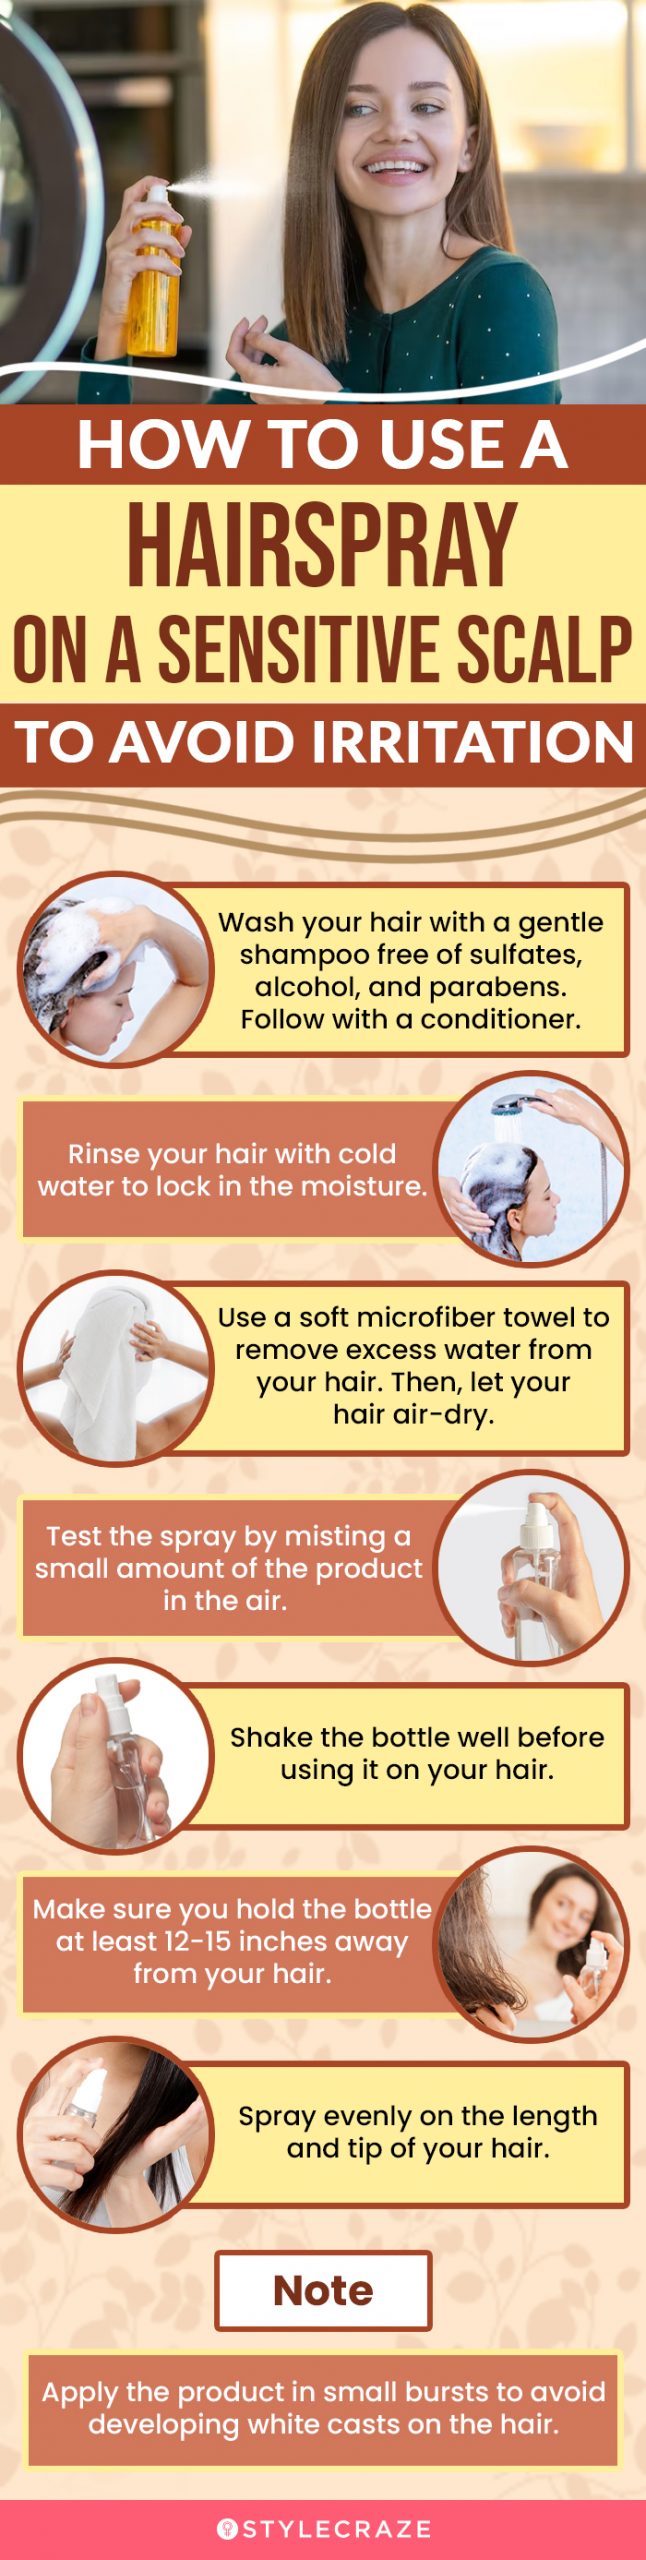 How To Use Hair Spray On Sensitive Scalp To Avoid Irritation (infographic)